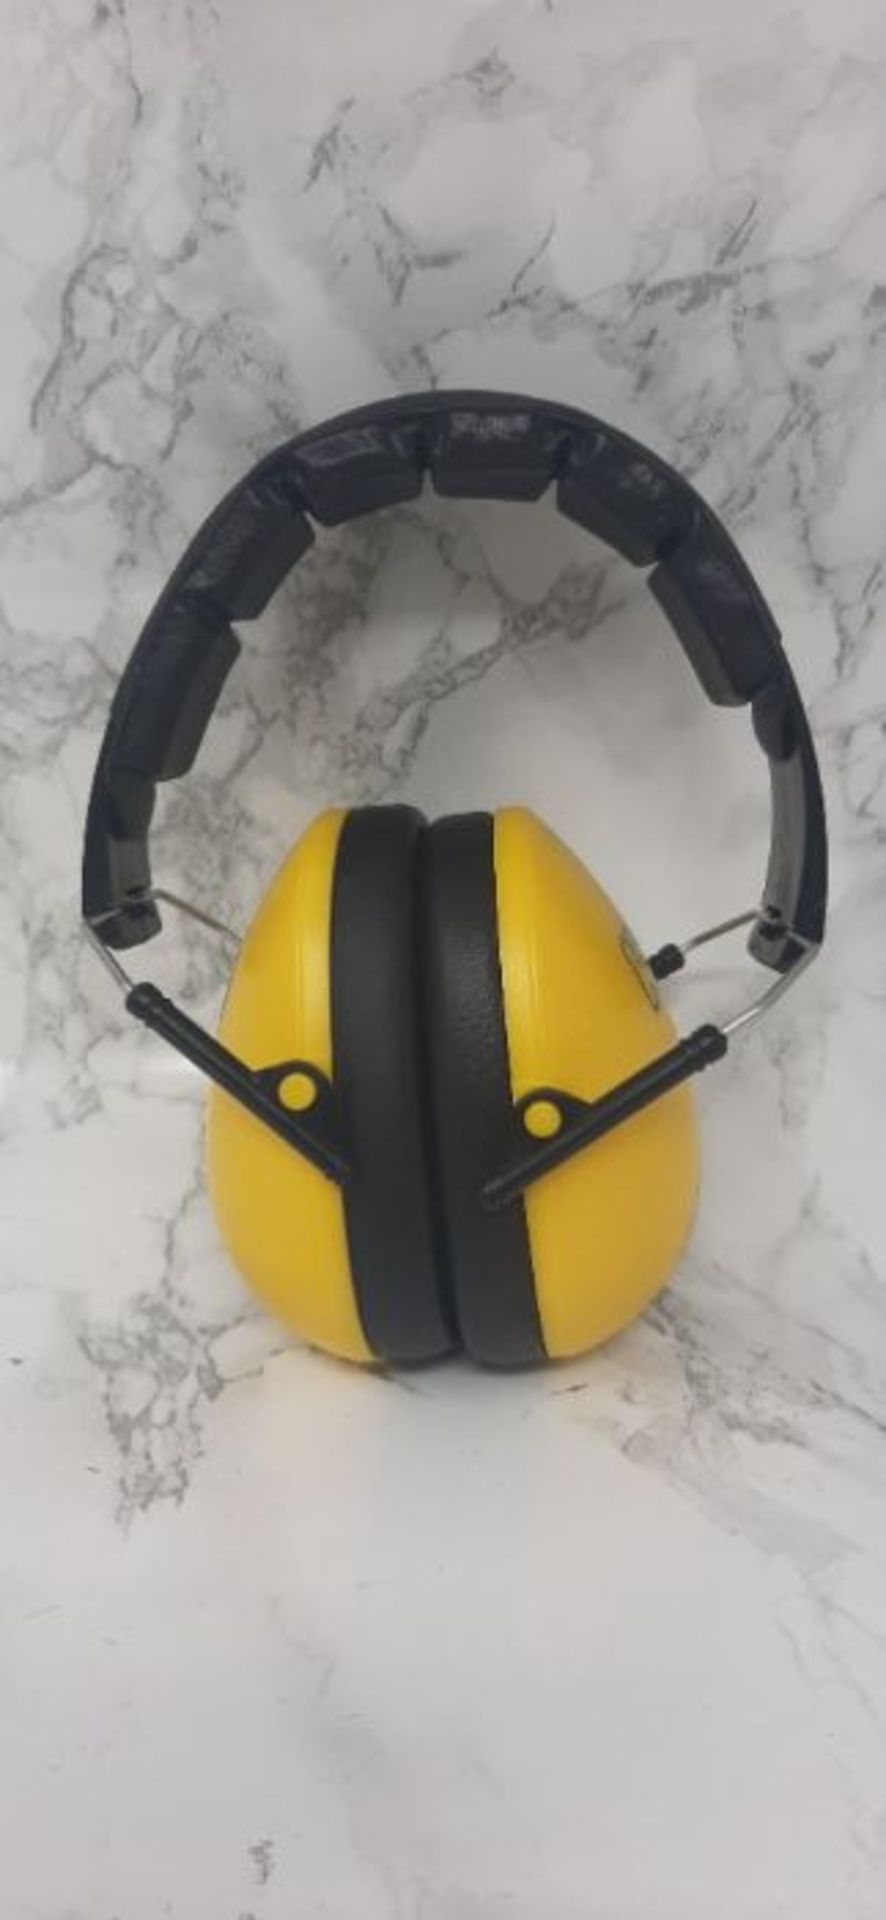 Edz Kidz Ear Defenders. Ear Protection for Toddlers Through Teens. (Yellow) - Image 2 of 3